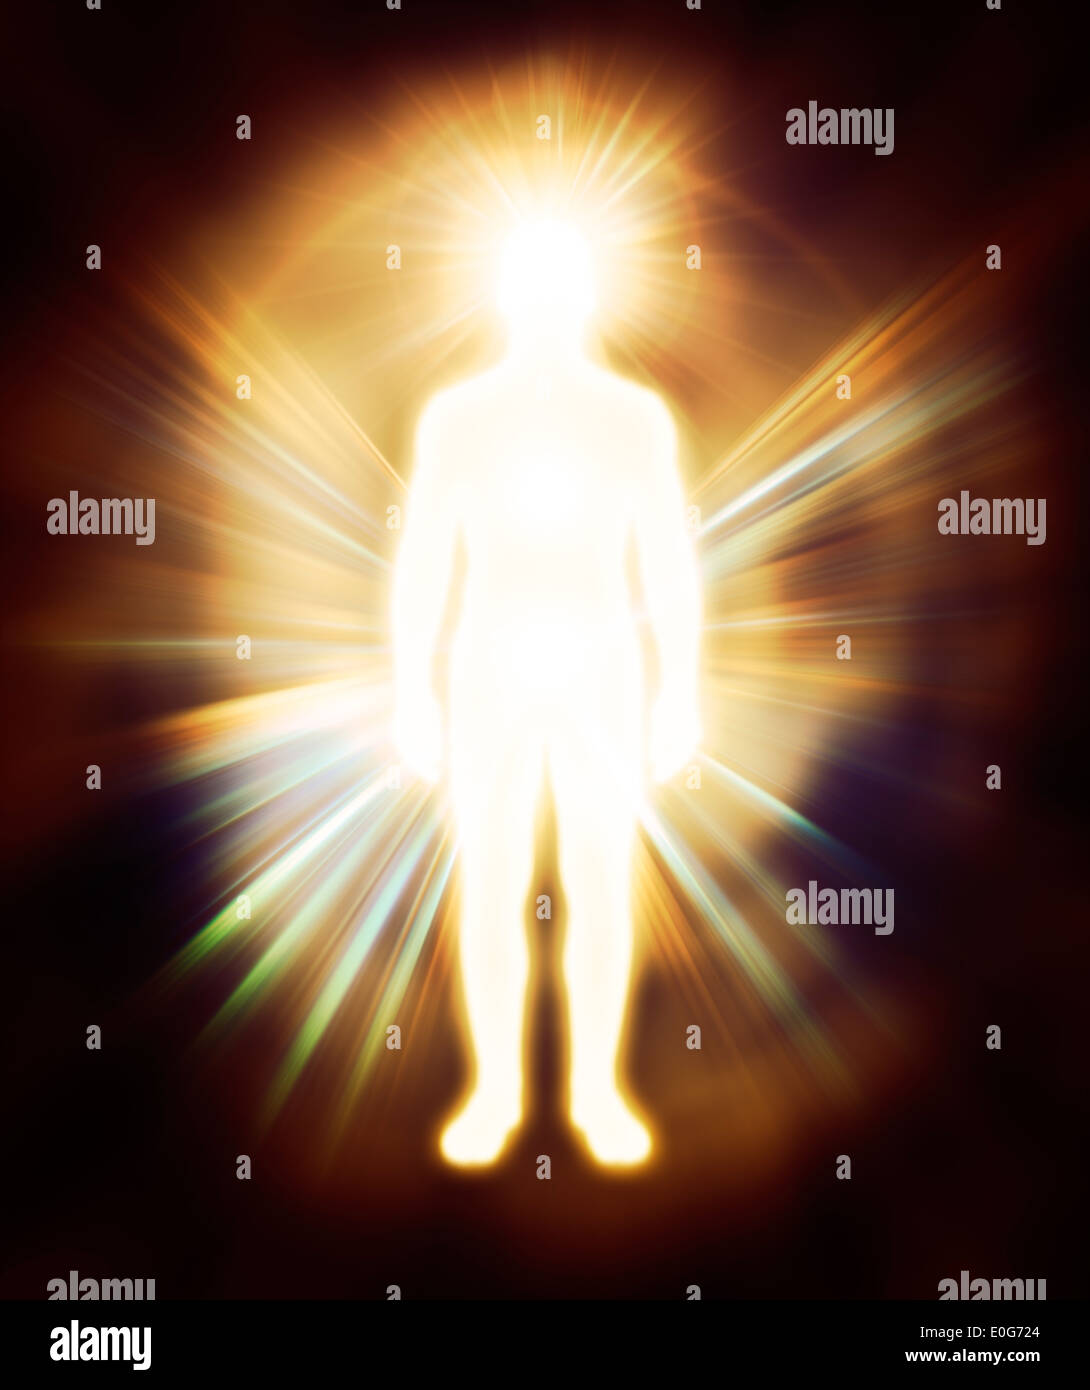 License available at MaximImages.com - Glowing human energy body Qi energy emanations. Man as luminous being, aura, spiritual concept Stock Photo